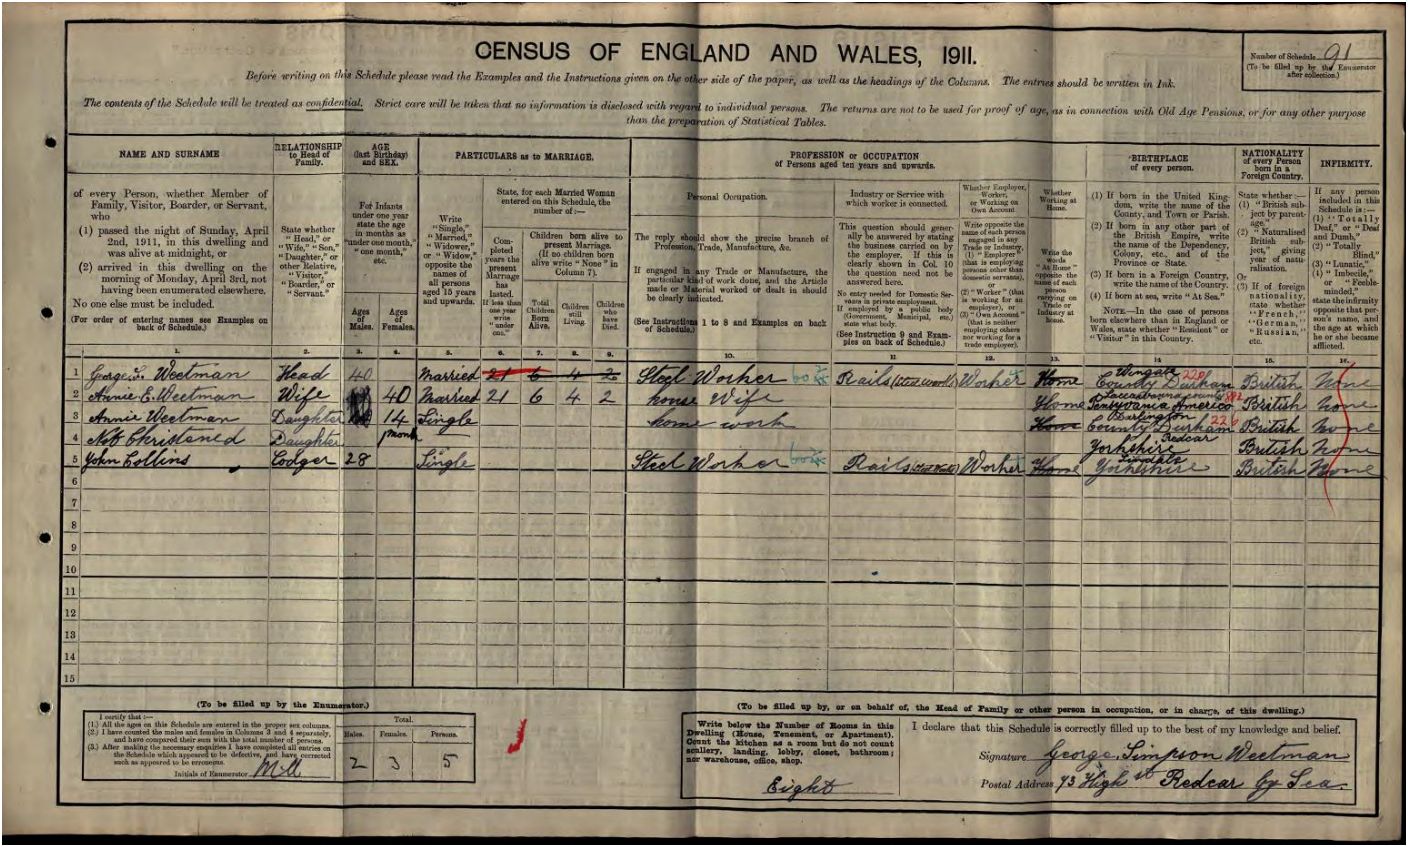 George Weetman in the 1911 Census